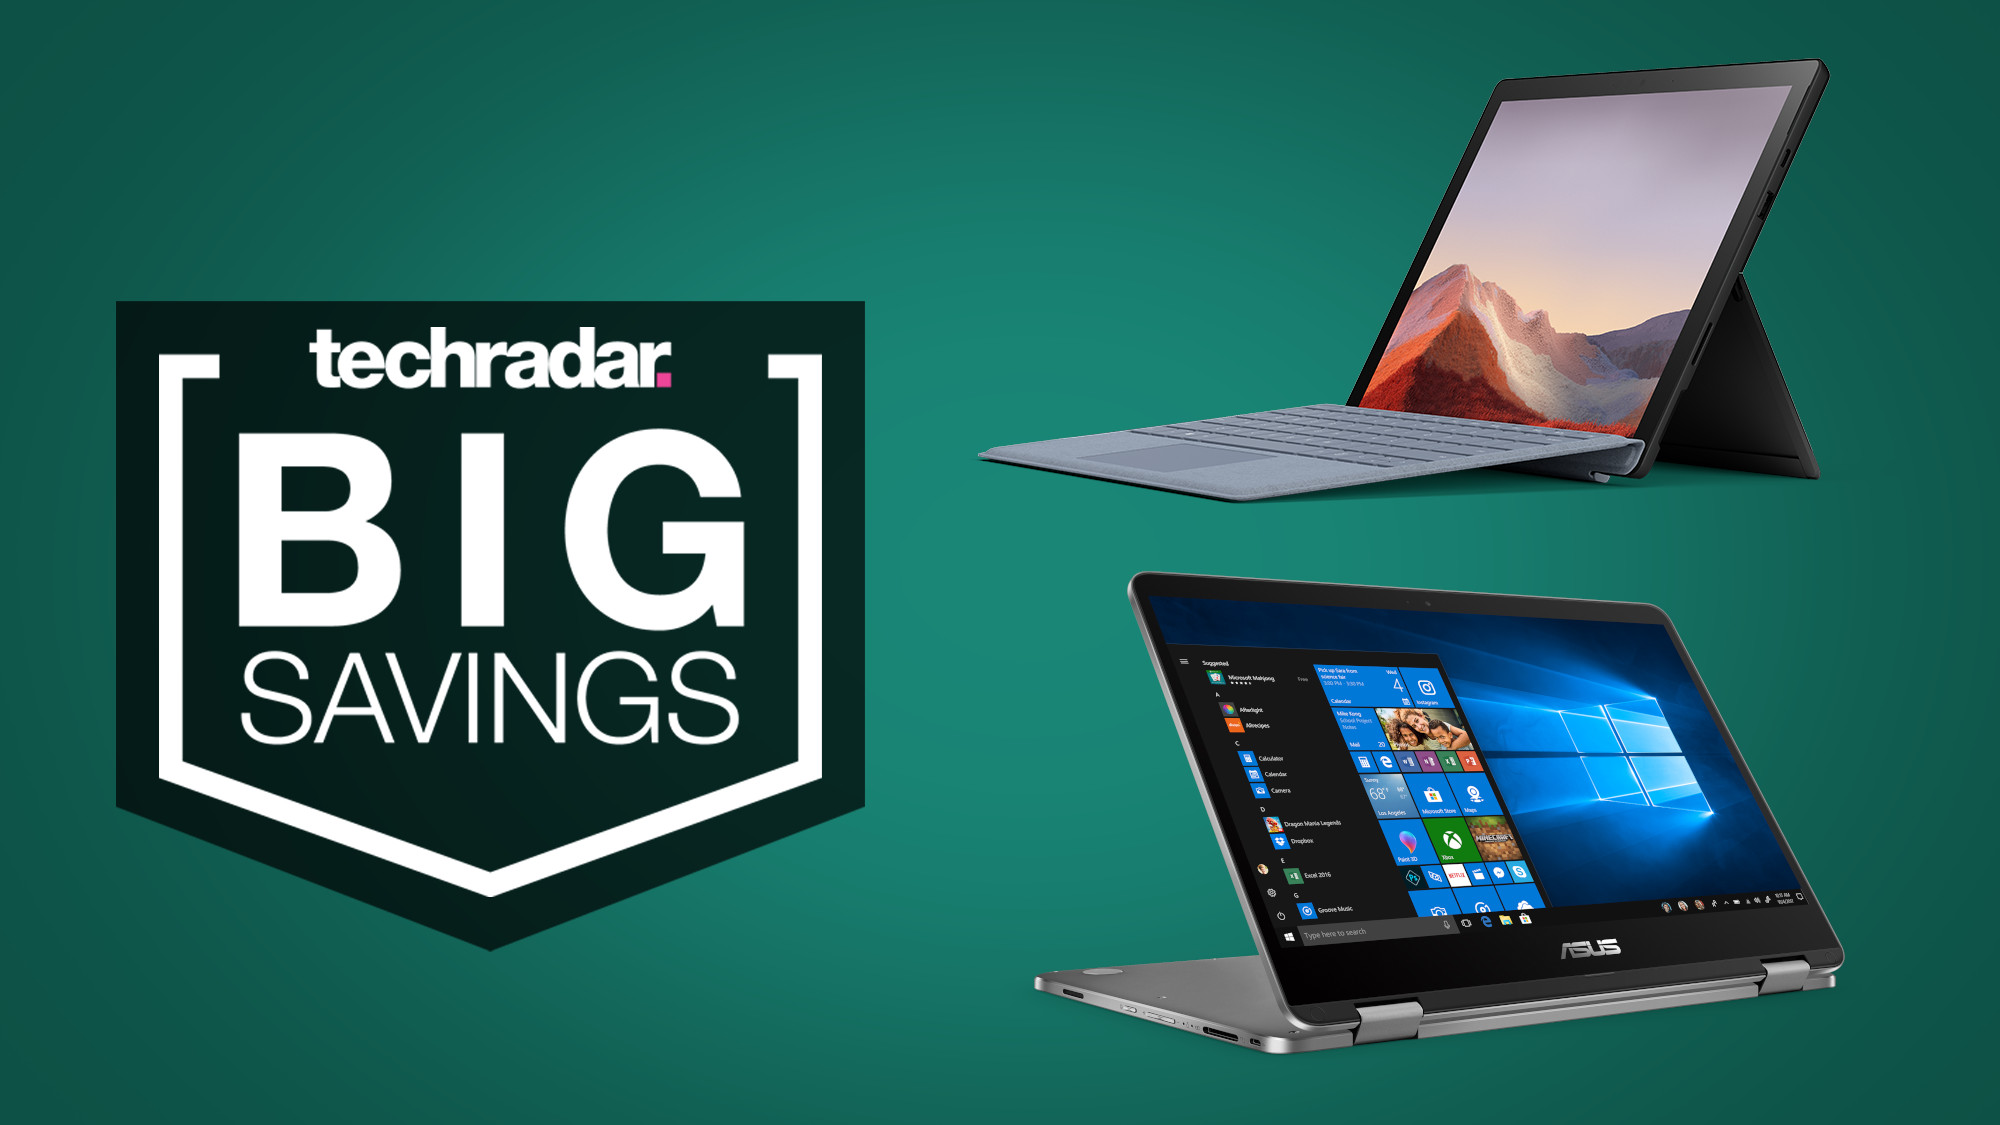 Microsoft's early Labor Day sales mean fantastic savings on a range of